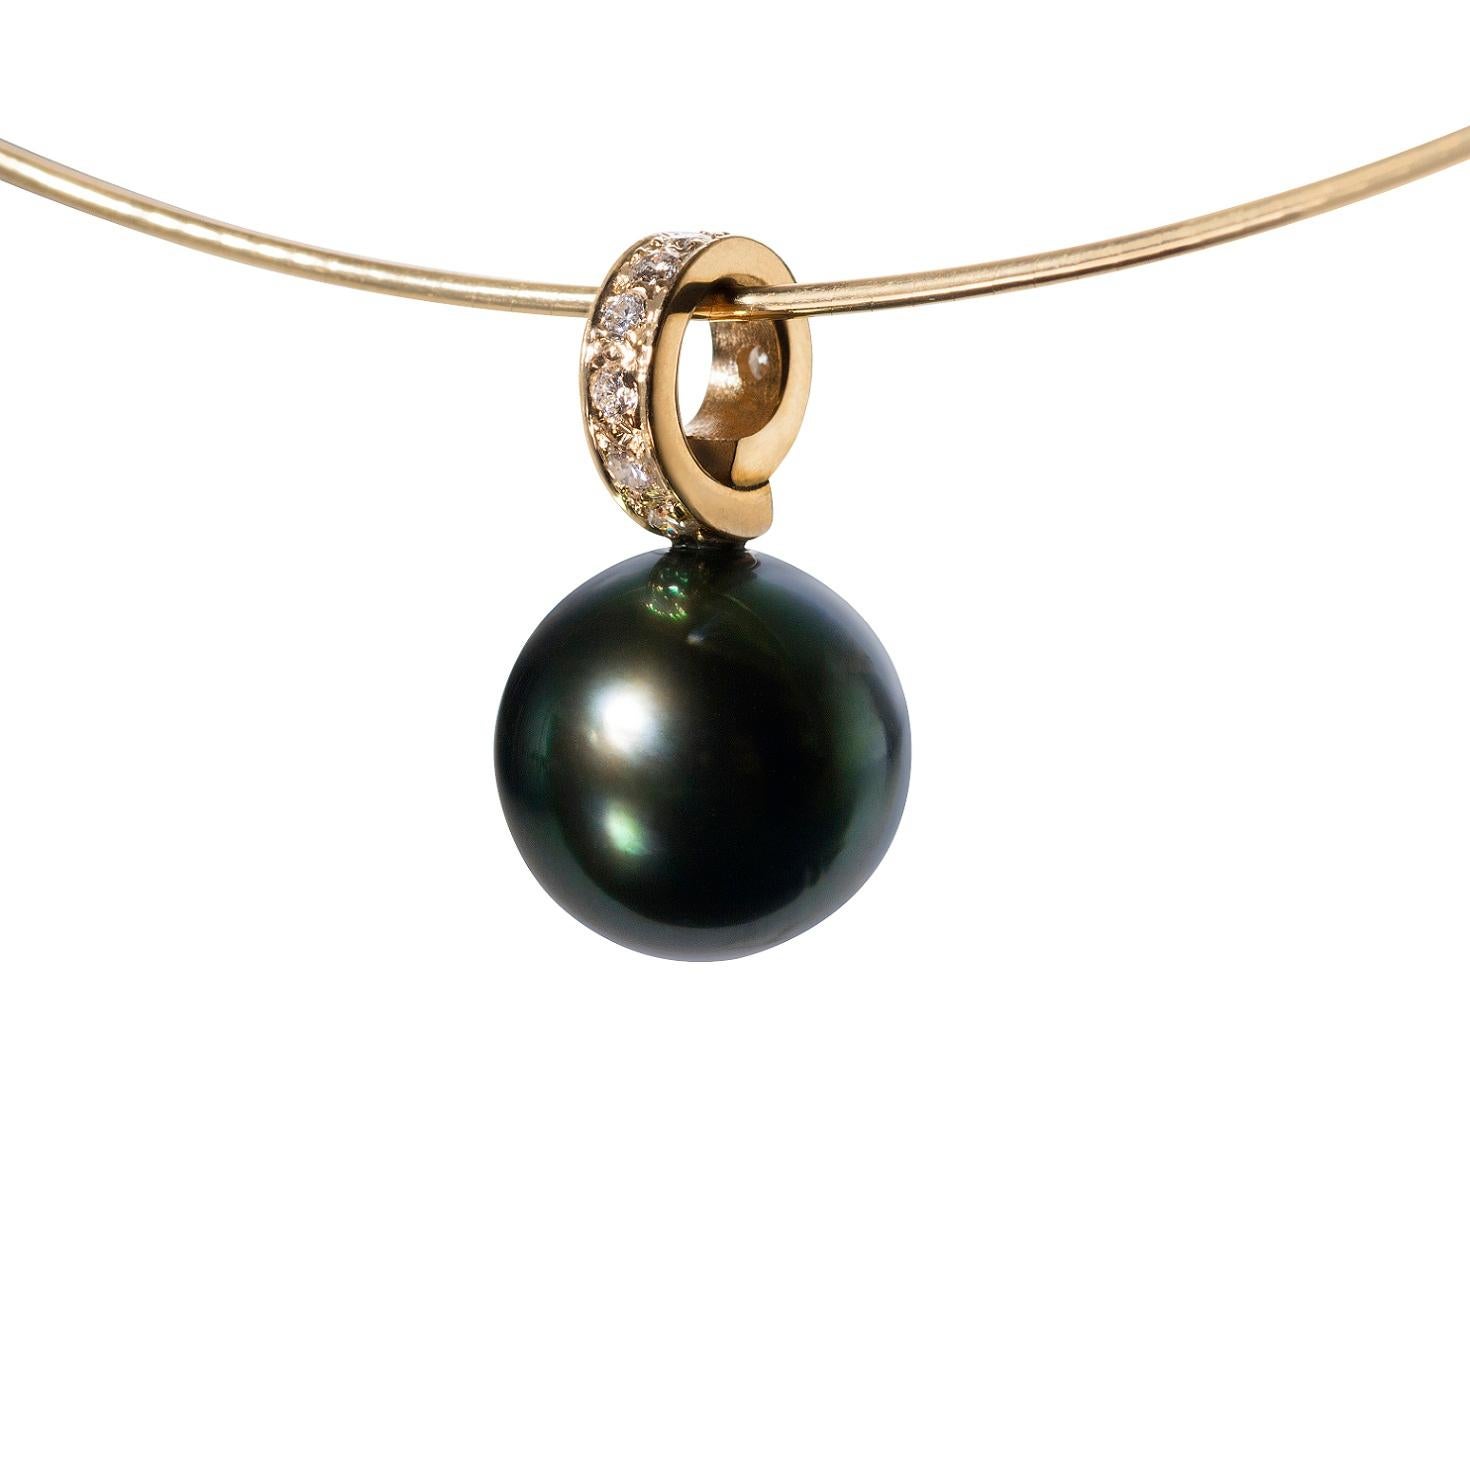 For the pearl lover out there - this Cirrus Tahitian pearl pendant will make you swoon. The pearl is over 11.5mm and has the beautiful iridescent shades of green, pink and gold that the most sought after Tahitian pearls are known for. The 14k gold